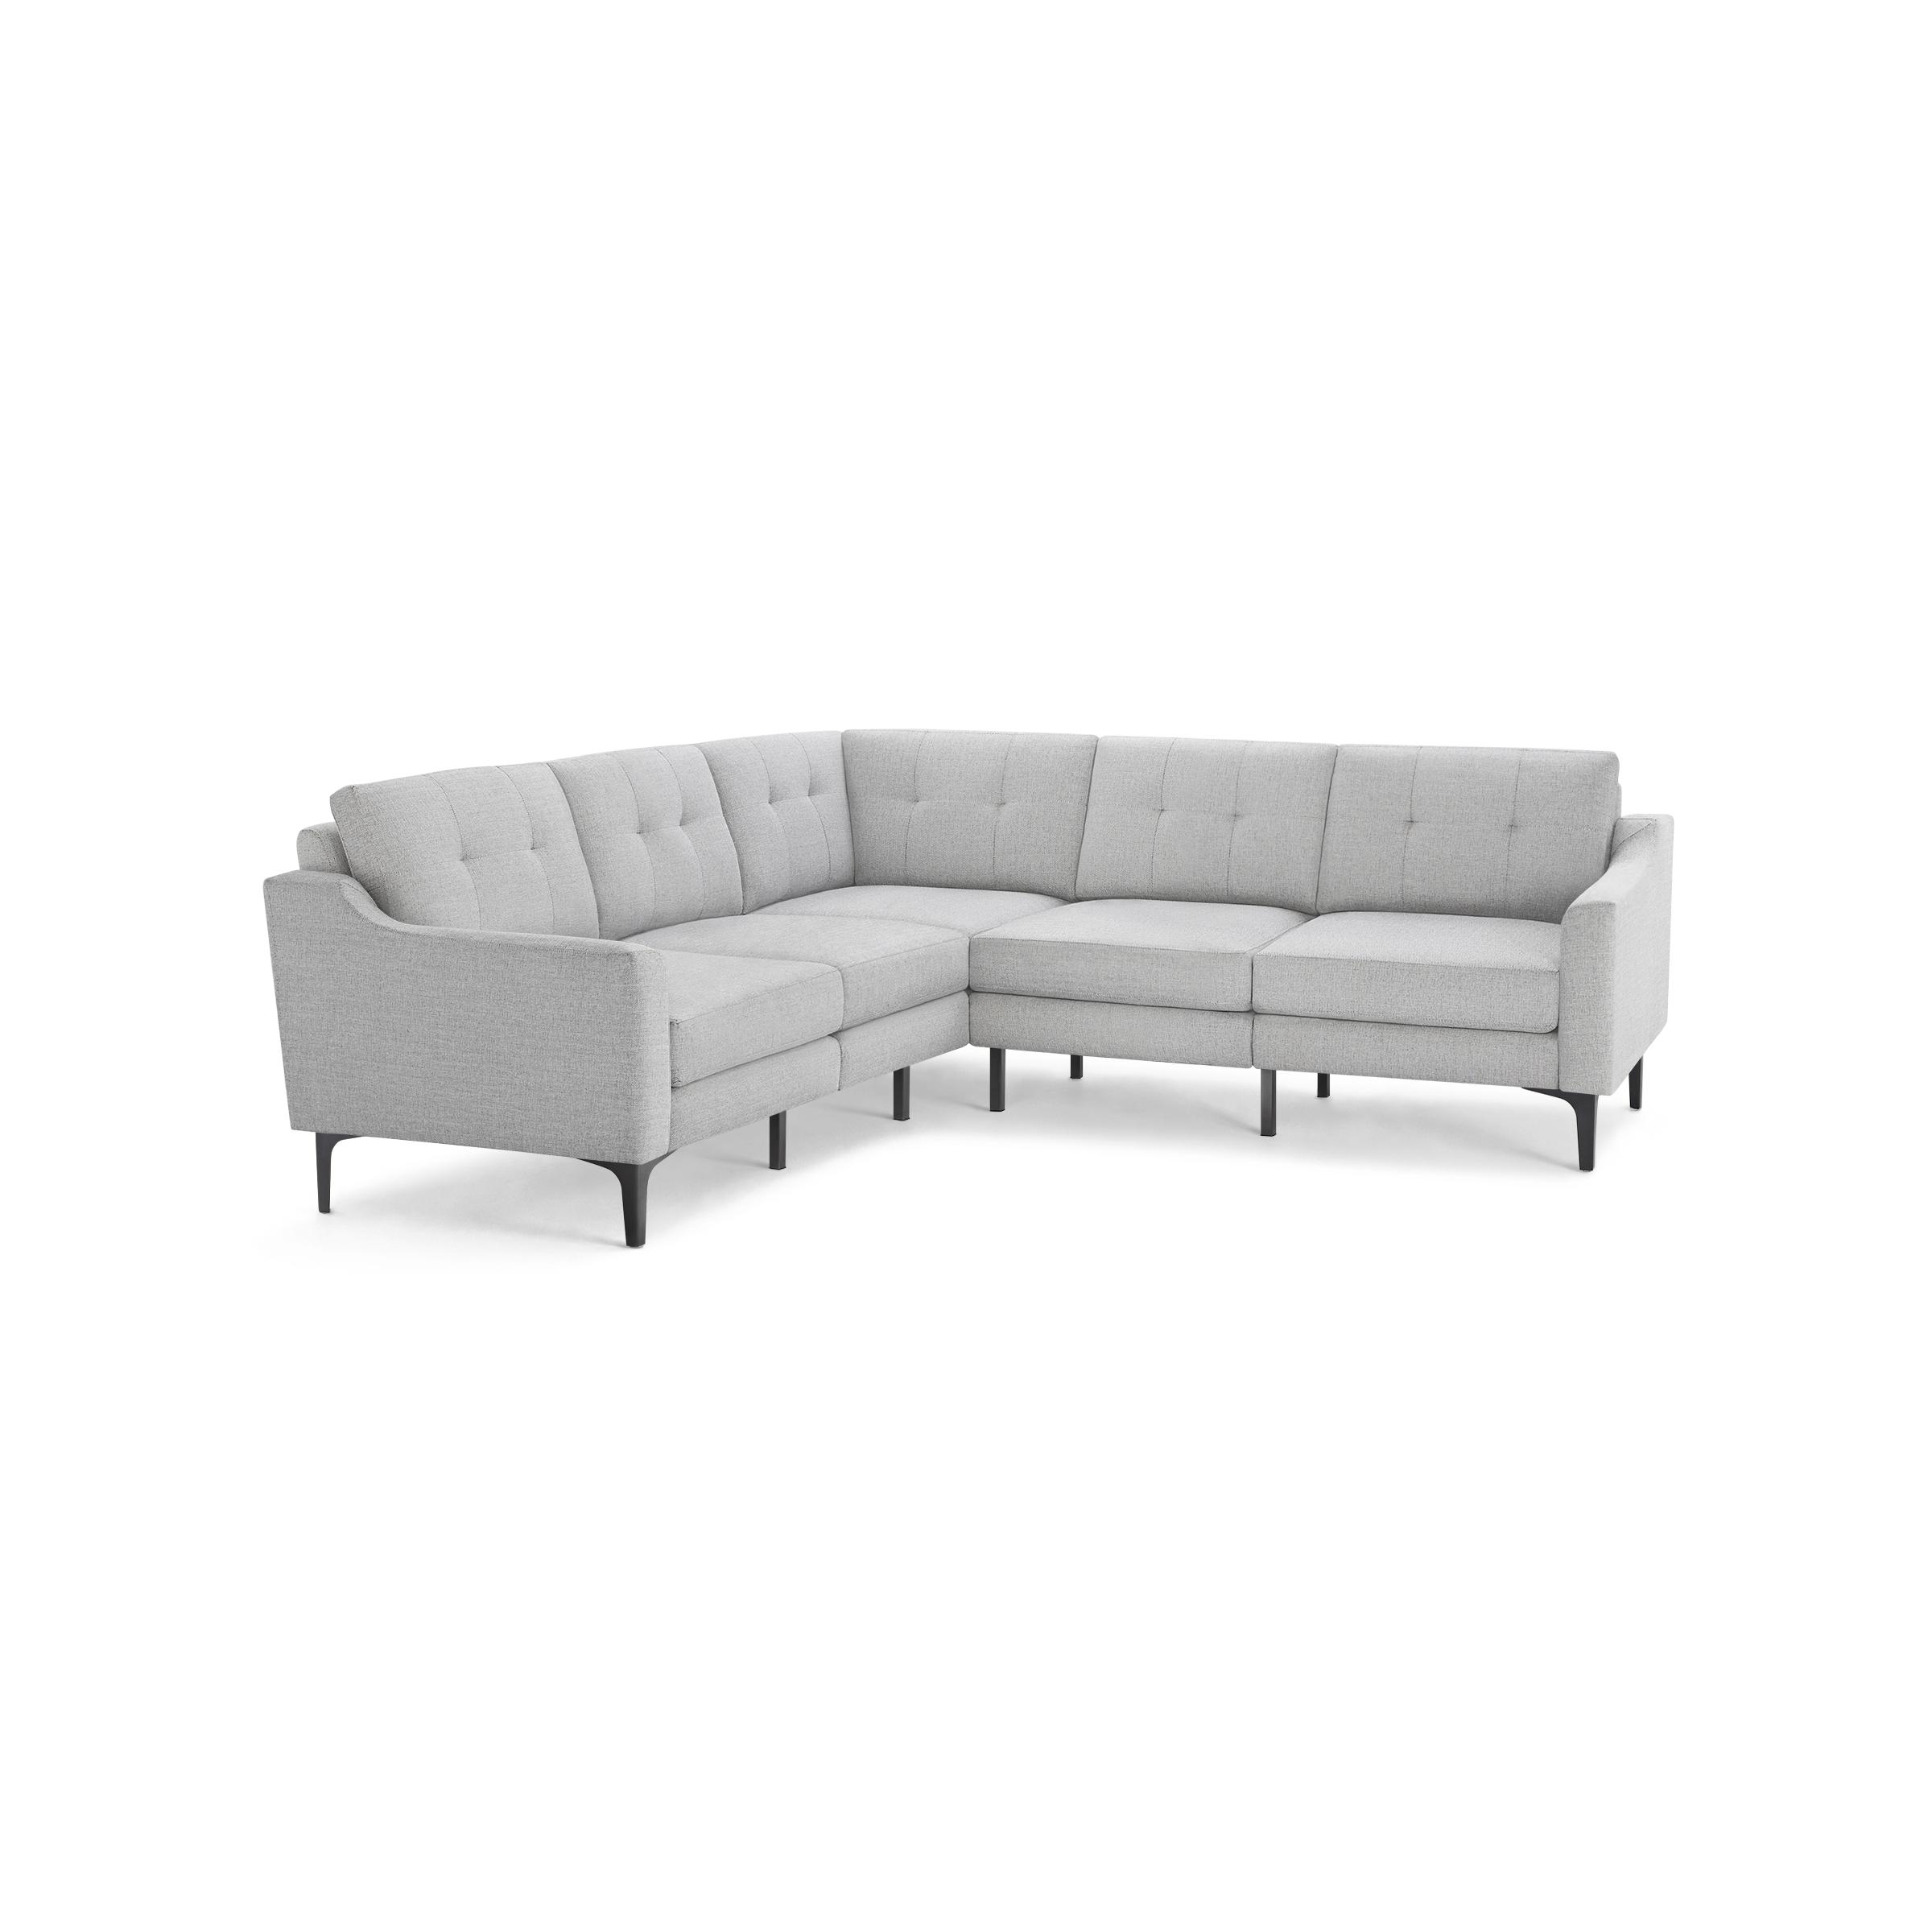 The Slope Nomad 5-Seat Corner Sectional in Crushed Gravel - Image 2